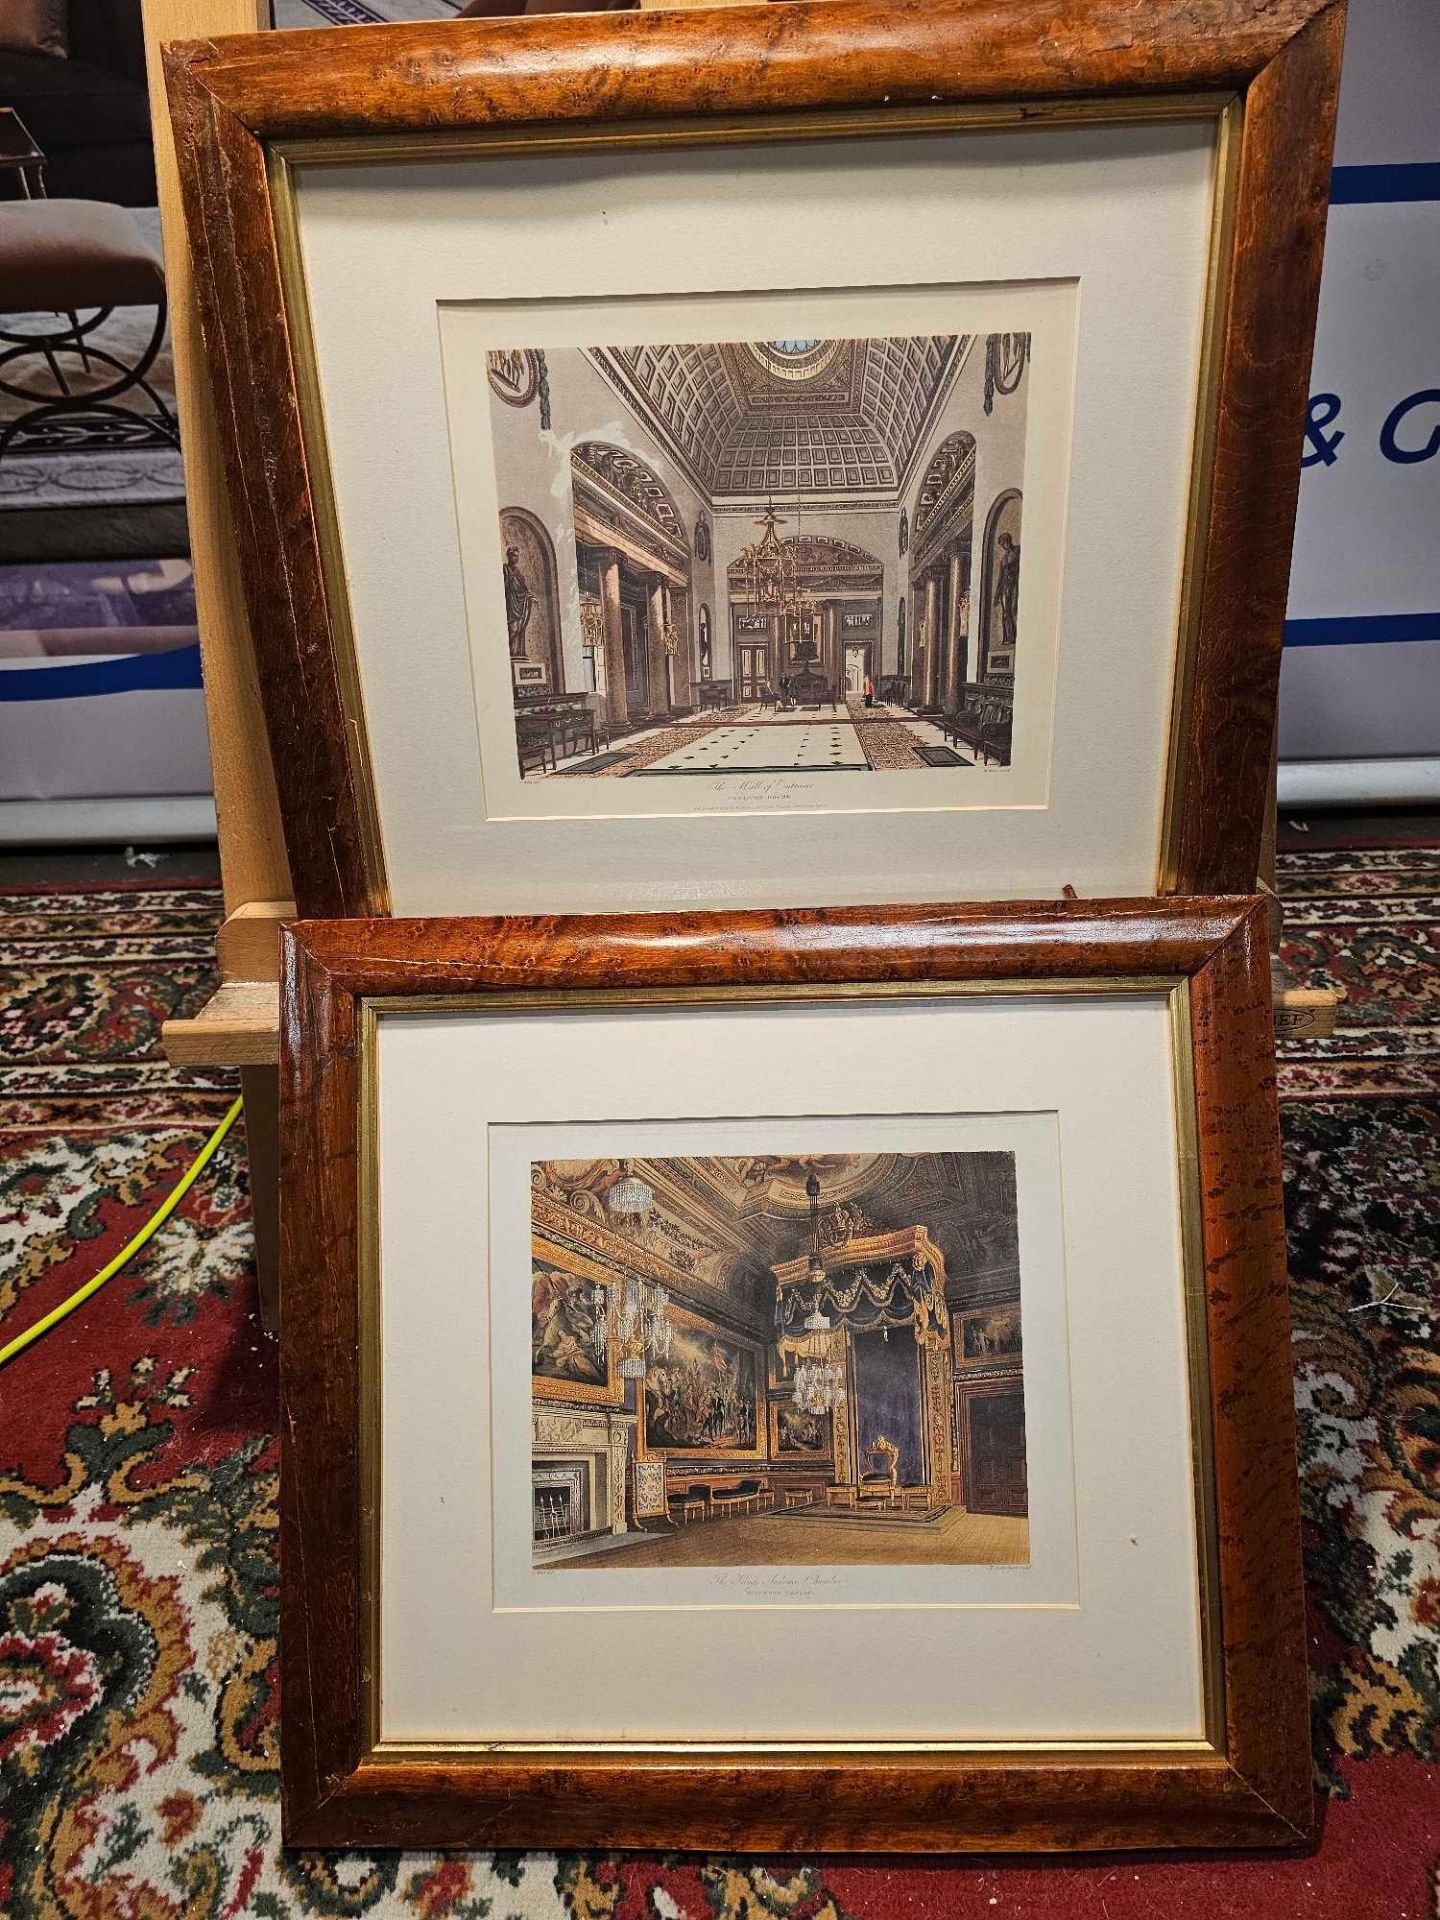 2 x Framed Prints (1) Interior View of The King's Audience Room At Windsor Castle, Berkshire, 1818